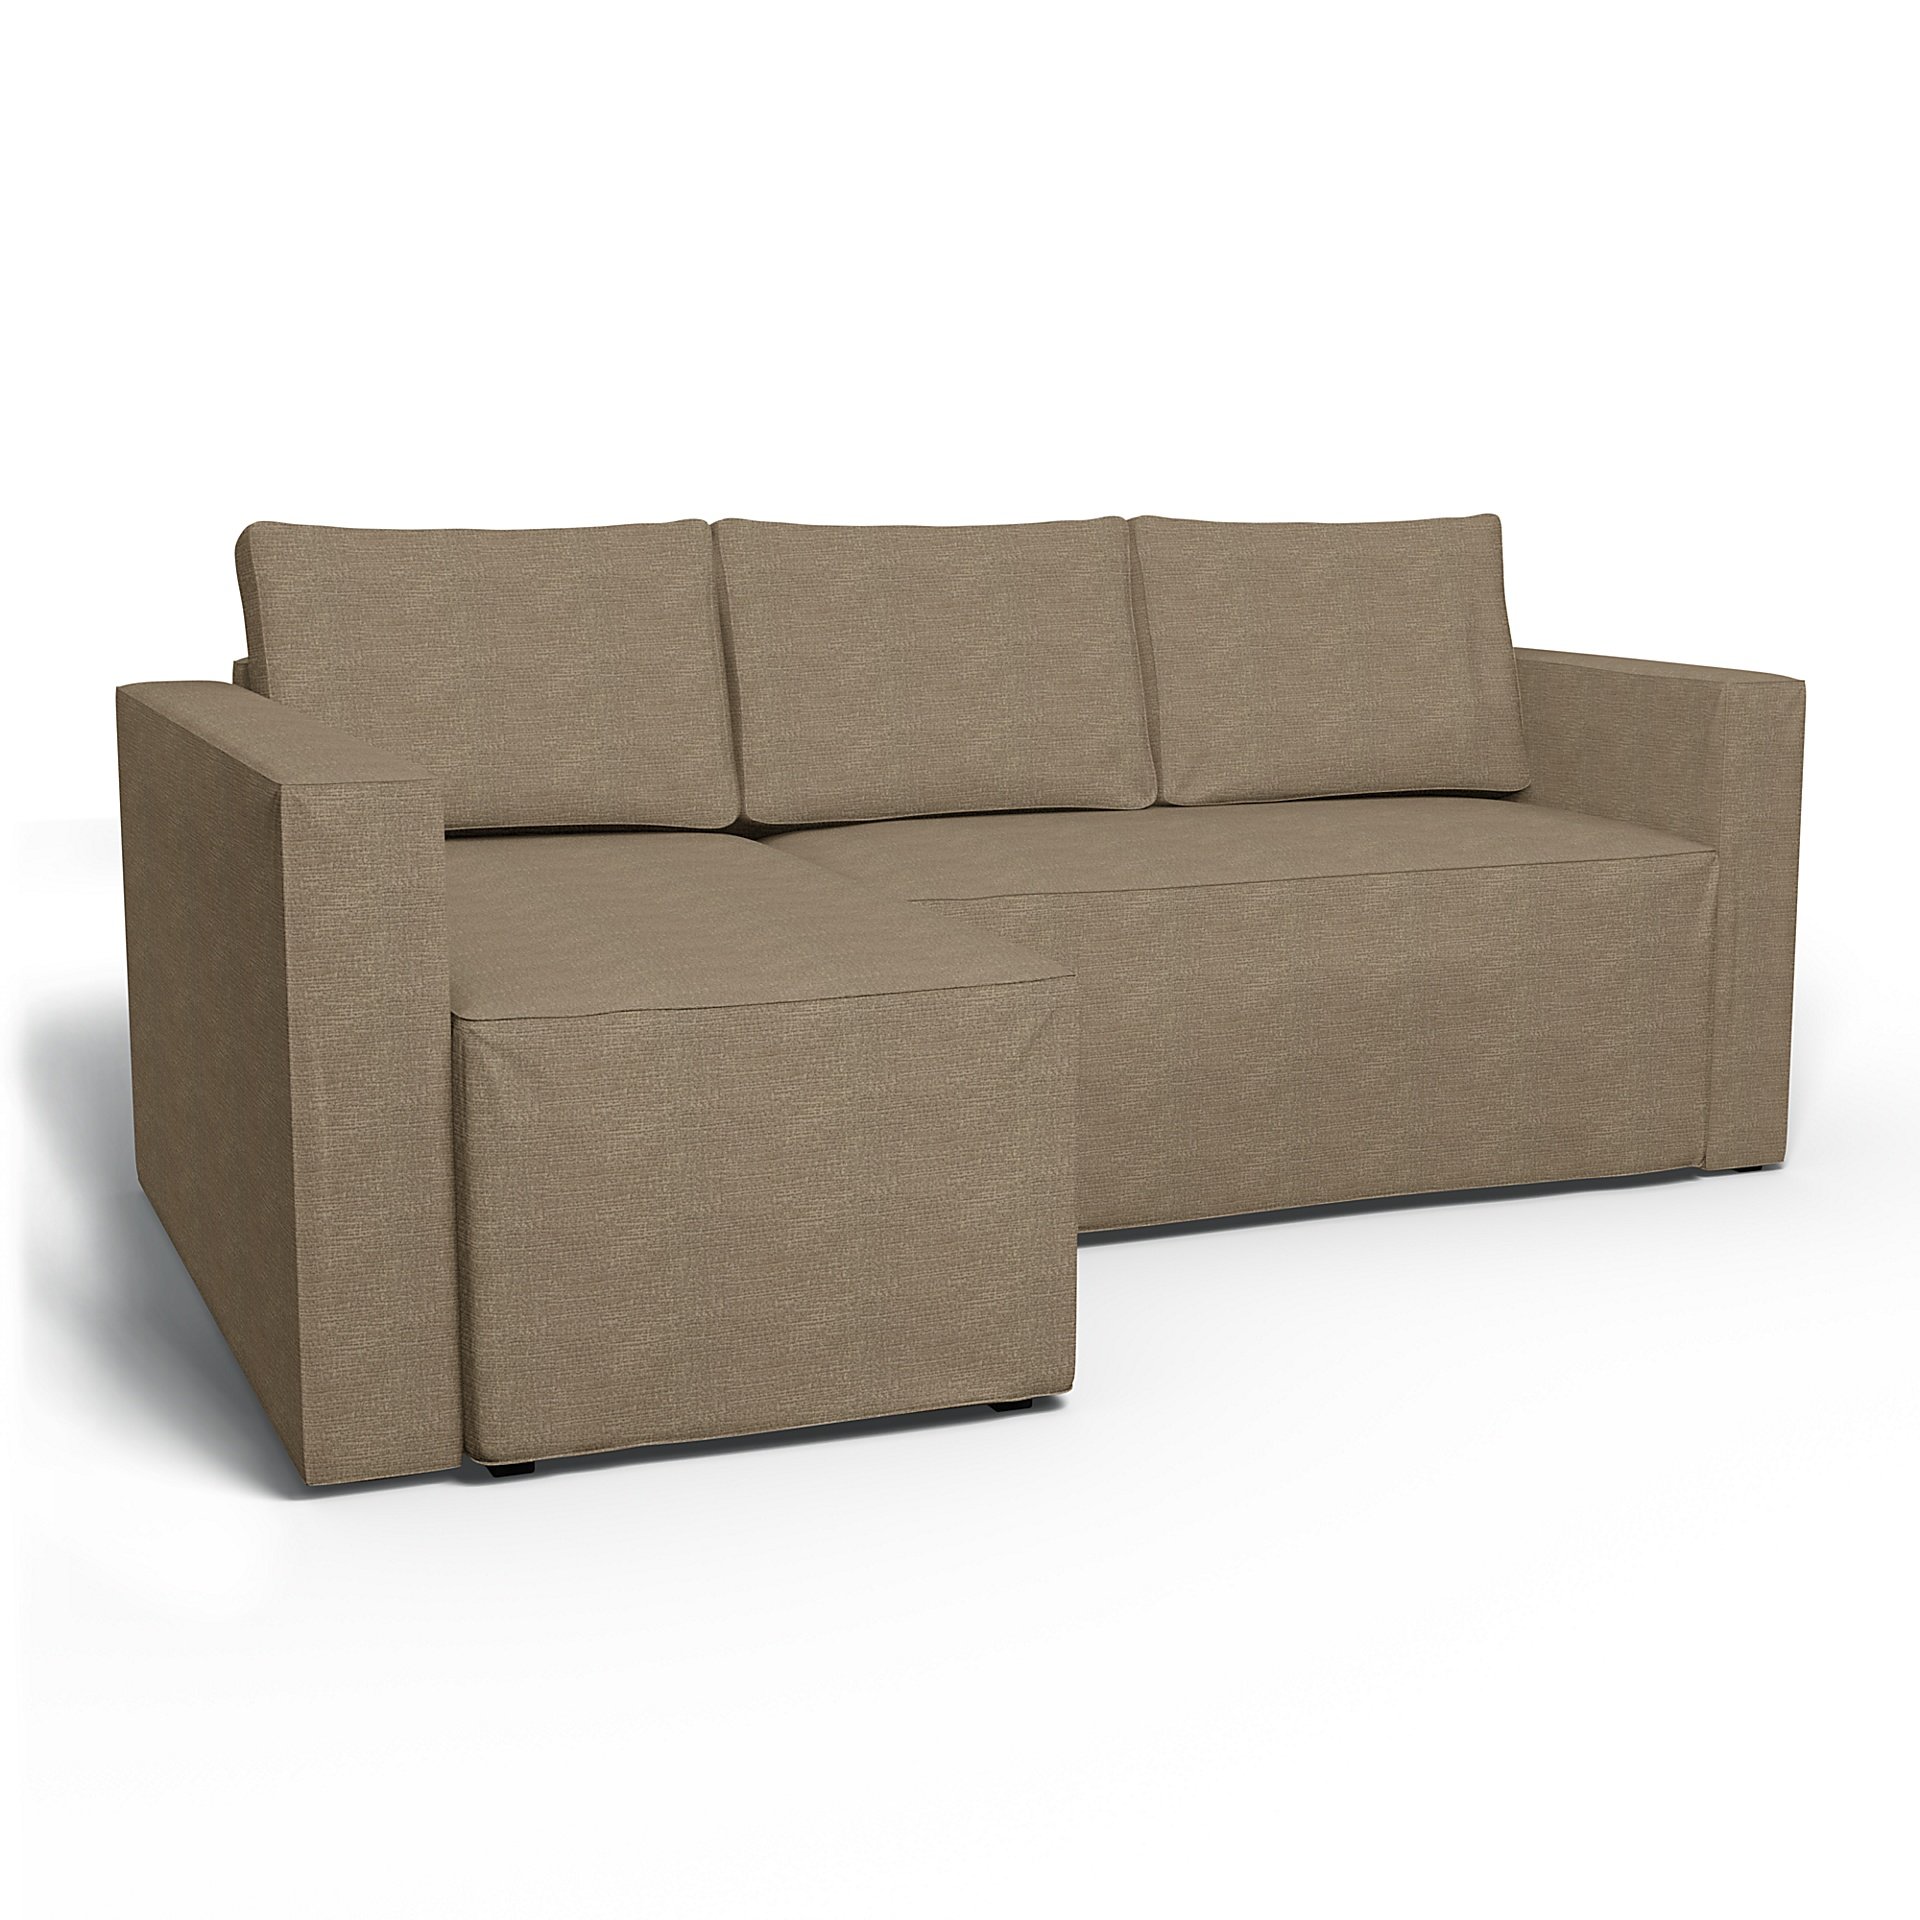 IKEA - Manstad Sofa Bed with Left Chaise Cover, Camel, Boucle & Texture - Bemz